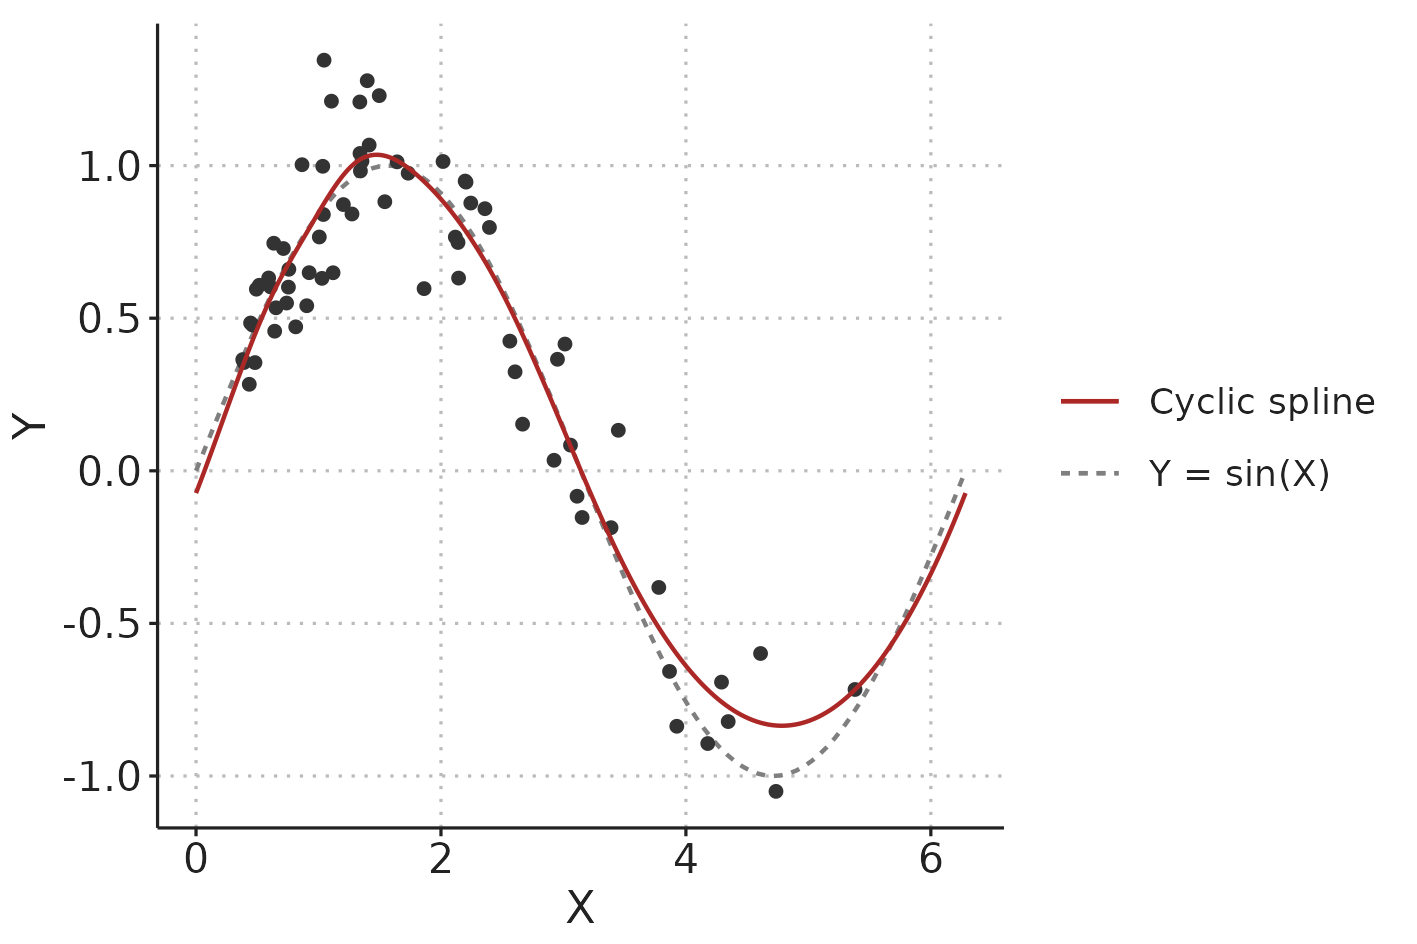 Illustration comparing a cyclic spline fit to the data-generating function (\(Y = sin(X)\) with added Gaussian noise).